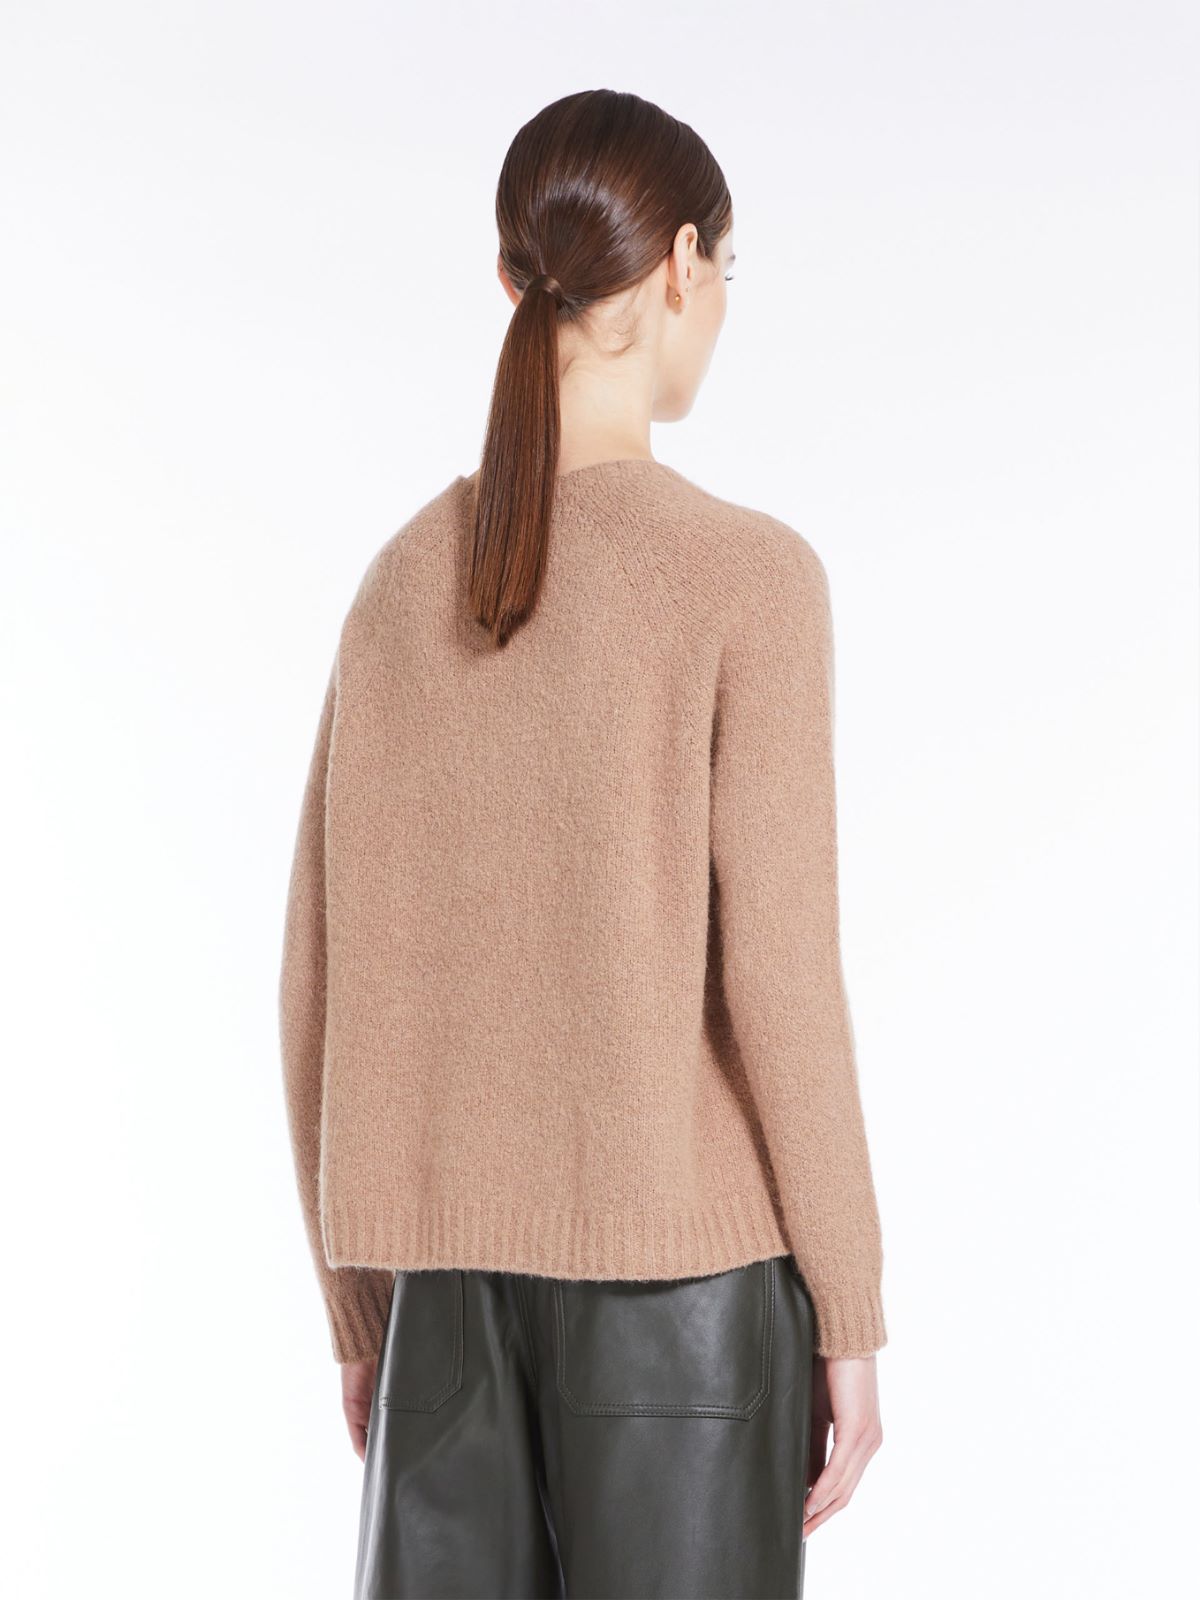 Soft knit top in alpaca and cotton - CAMEL - Weekend Max Mara - 3